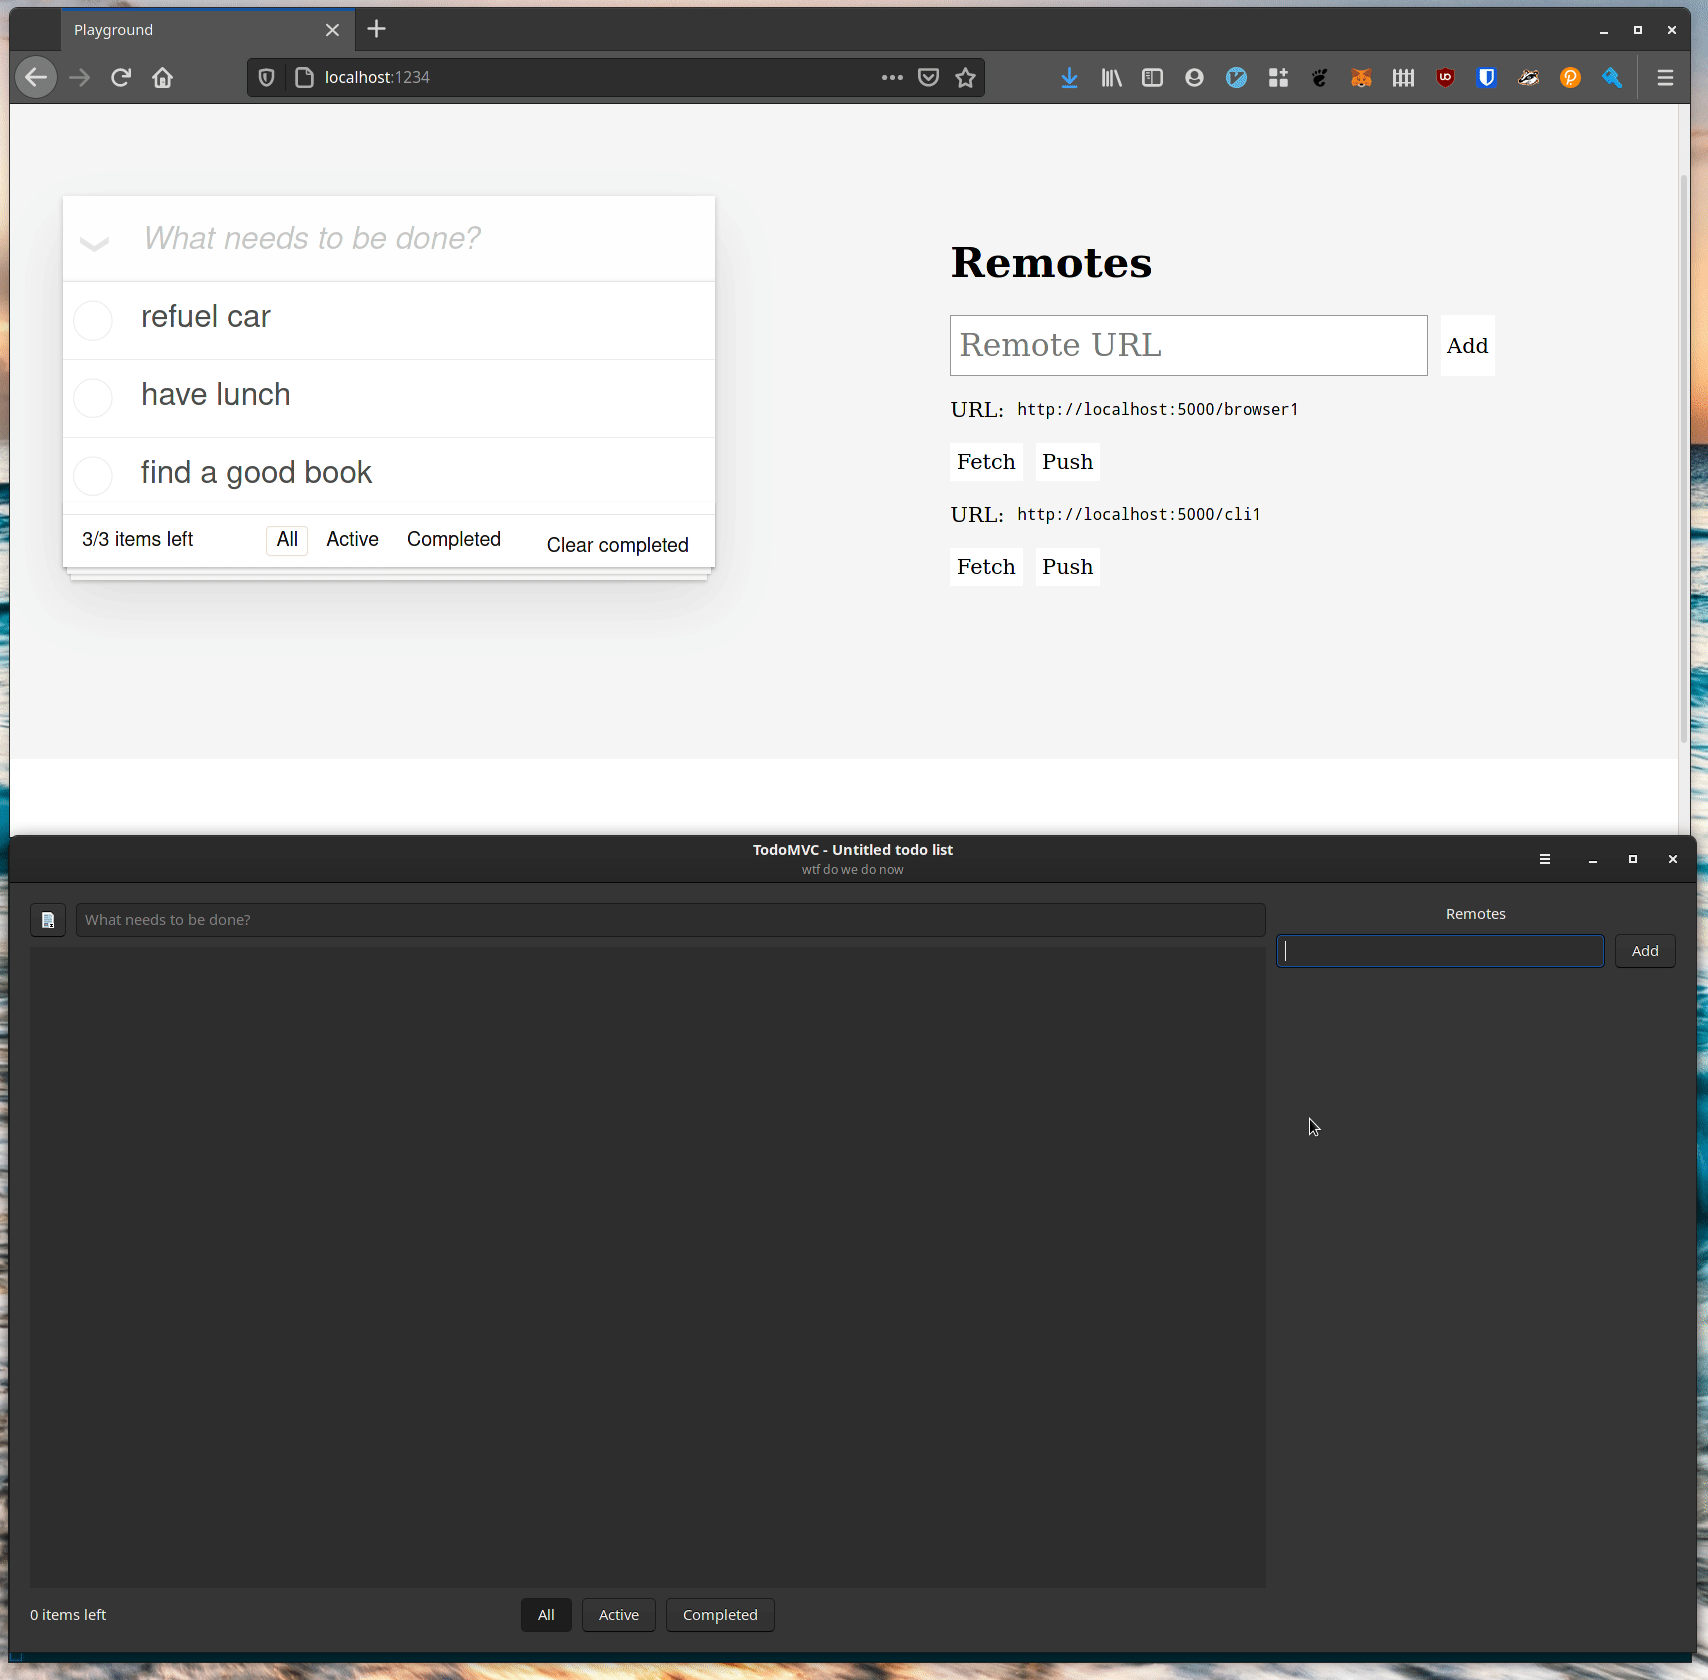 A gif showing a browser window with a todo list and list of peers, and a GTK GUI application with a todo list and a list of peers. The operator creates and modifies todo lists in each application and pushes and pulls changes between them